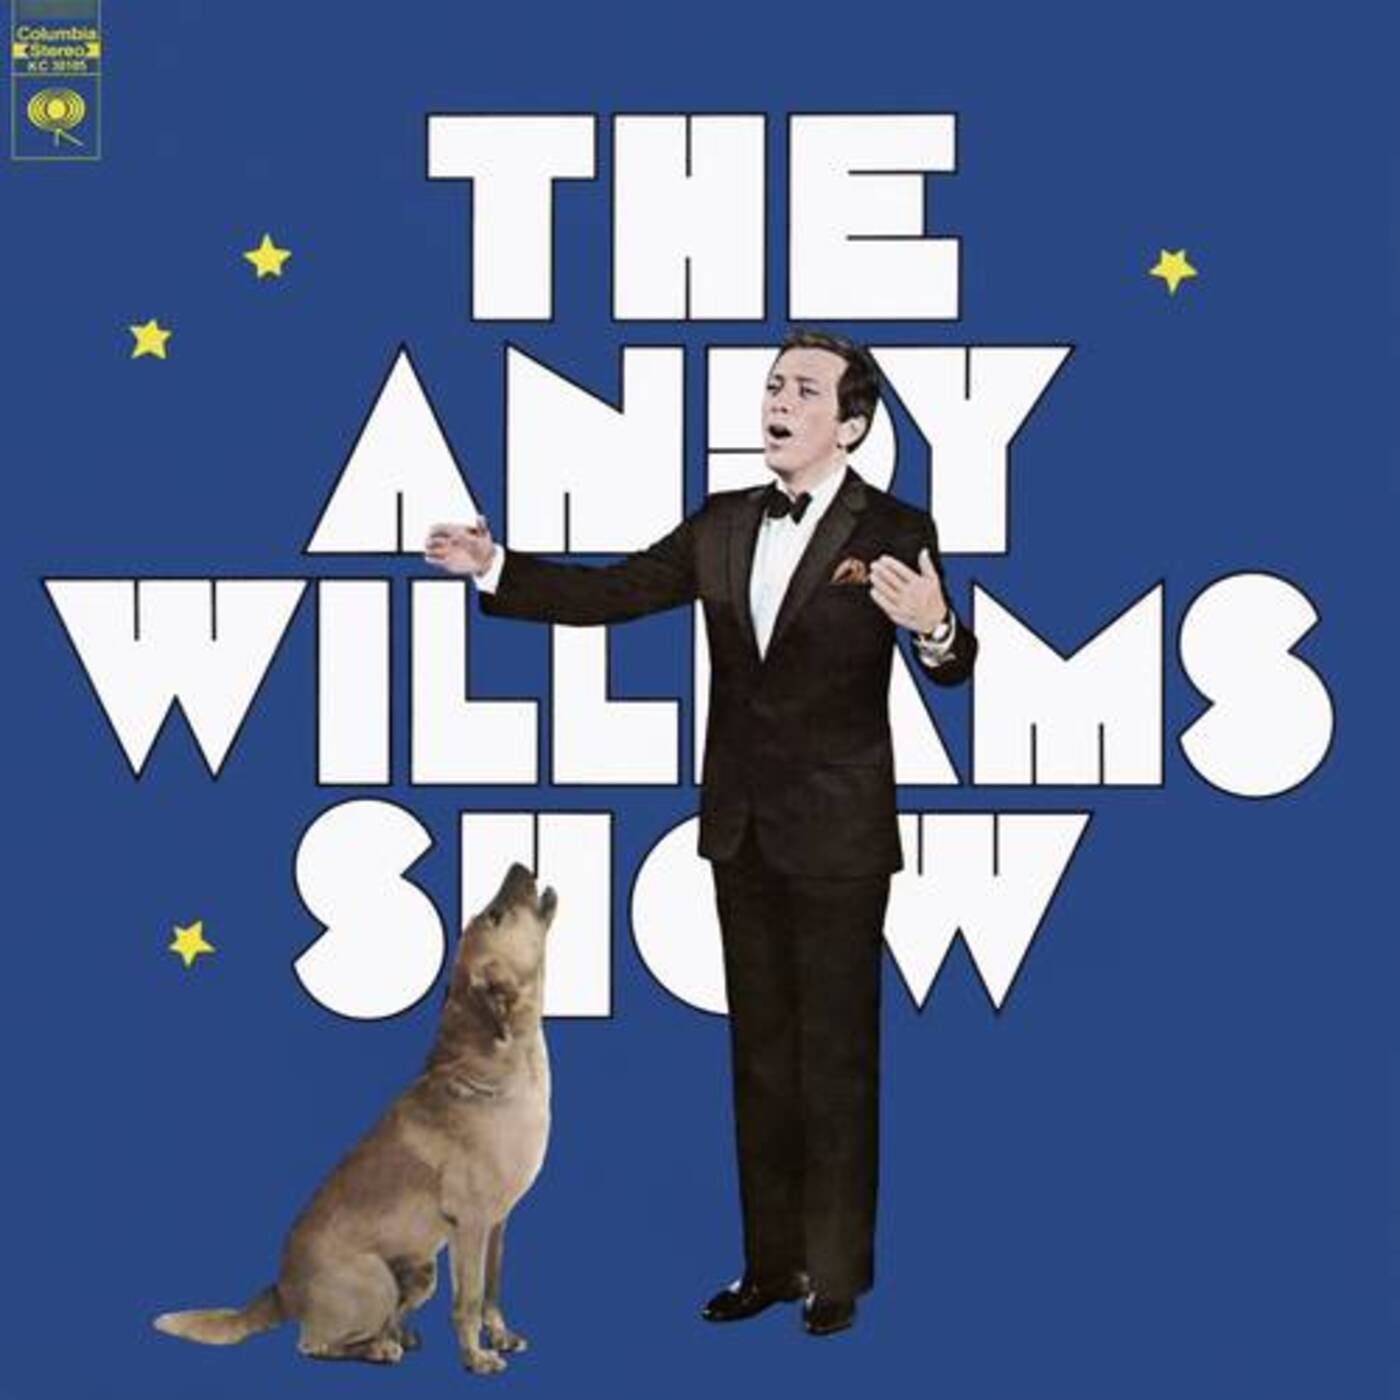 Alone Again (Naturally) [Quadrophonic] by Andy Williams (Album; Columbia;  CQ 31625): Reviews, Ratings, Credits, Song list - Rate Your Music